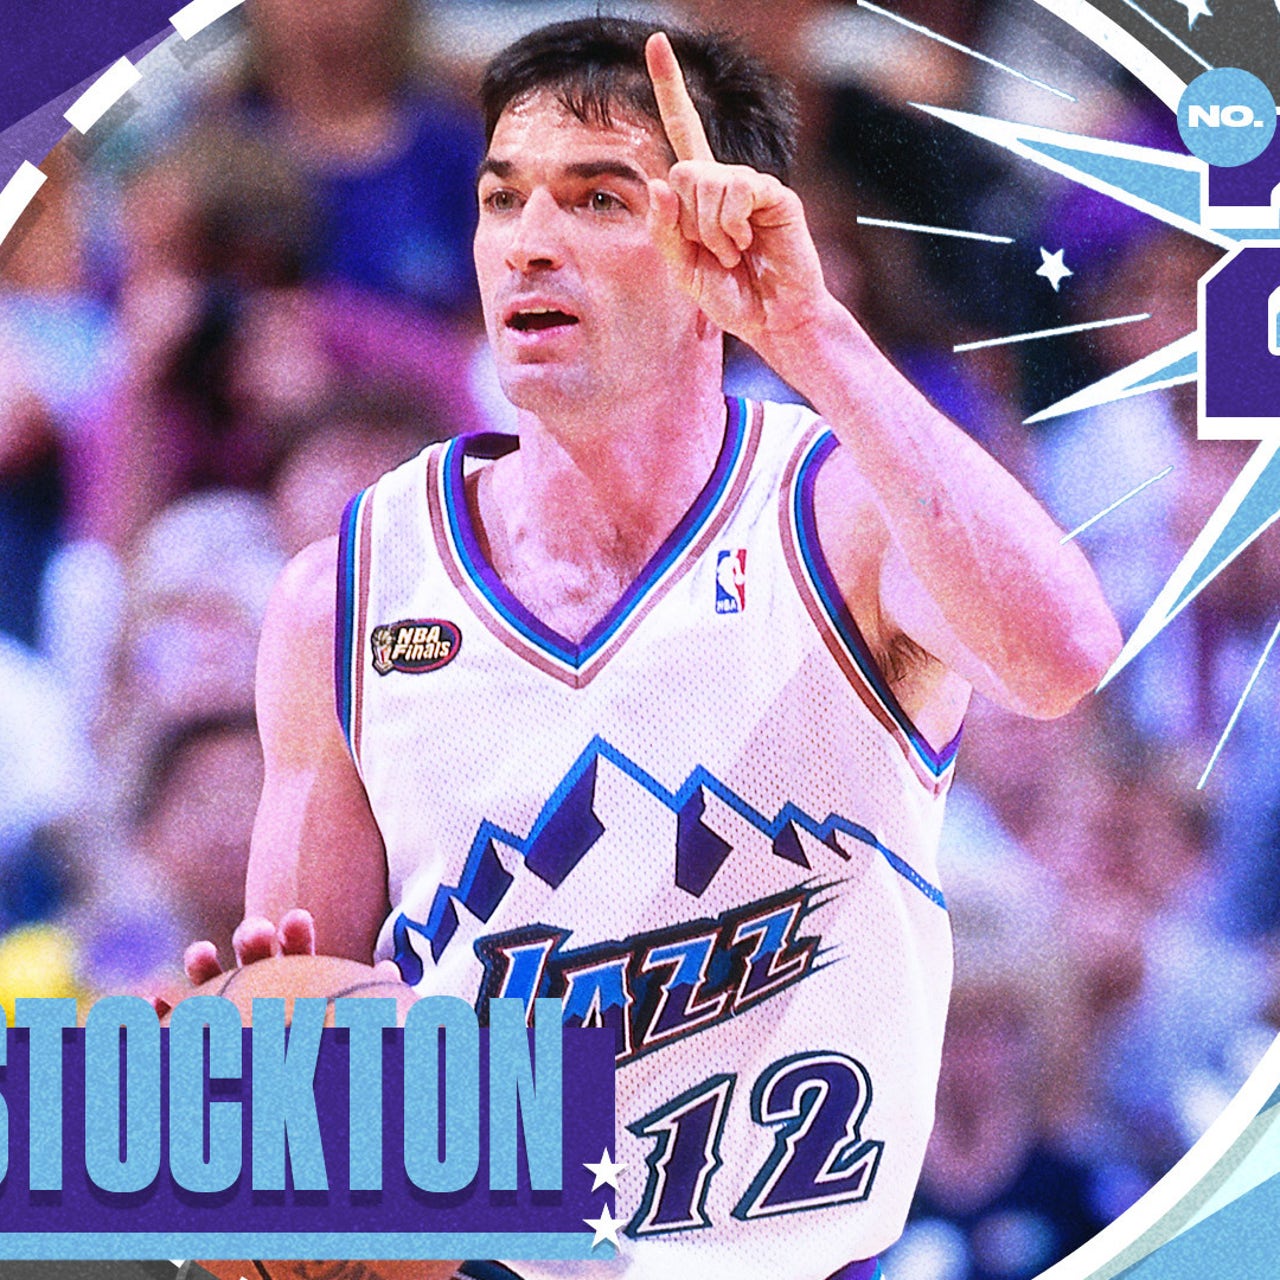 NBA All-Time Leader in Points Accounted For: John Stockton?